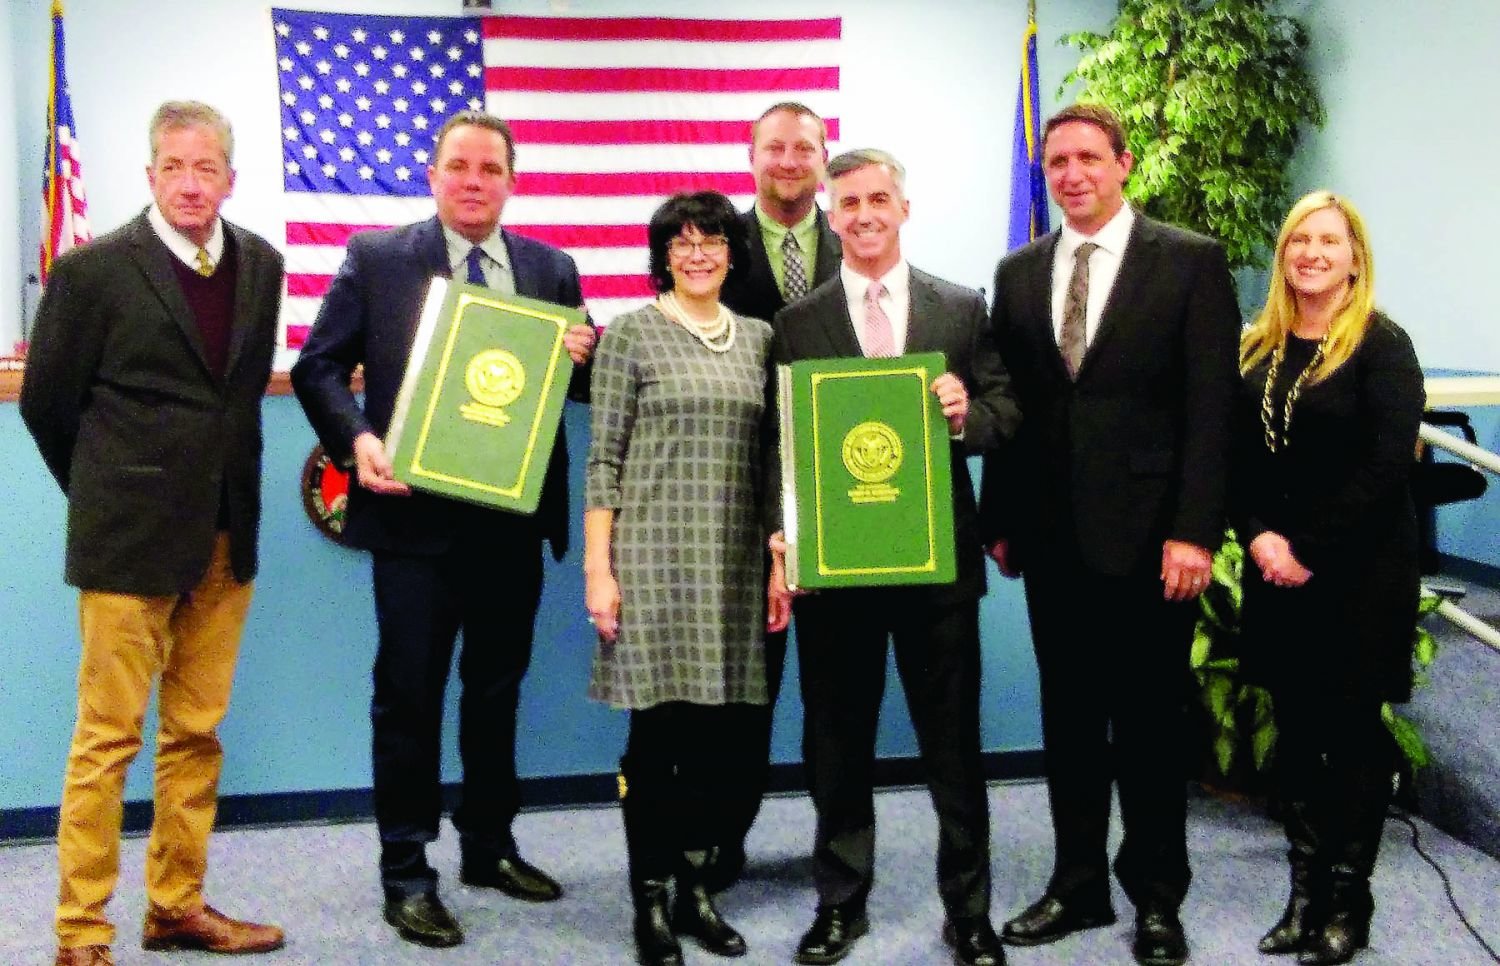 From left are Falls Township Supervisors Brian Galloway, Vice Chairman Jeffry Dence, Jeff Boraski, Chairman Bob Harvie and Jeff Rocco, along with Recorder of Deeds Robin Robinson, center, and Robinson’s First Deputy, Gail Humphrey.